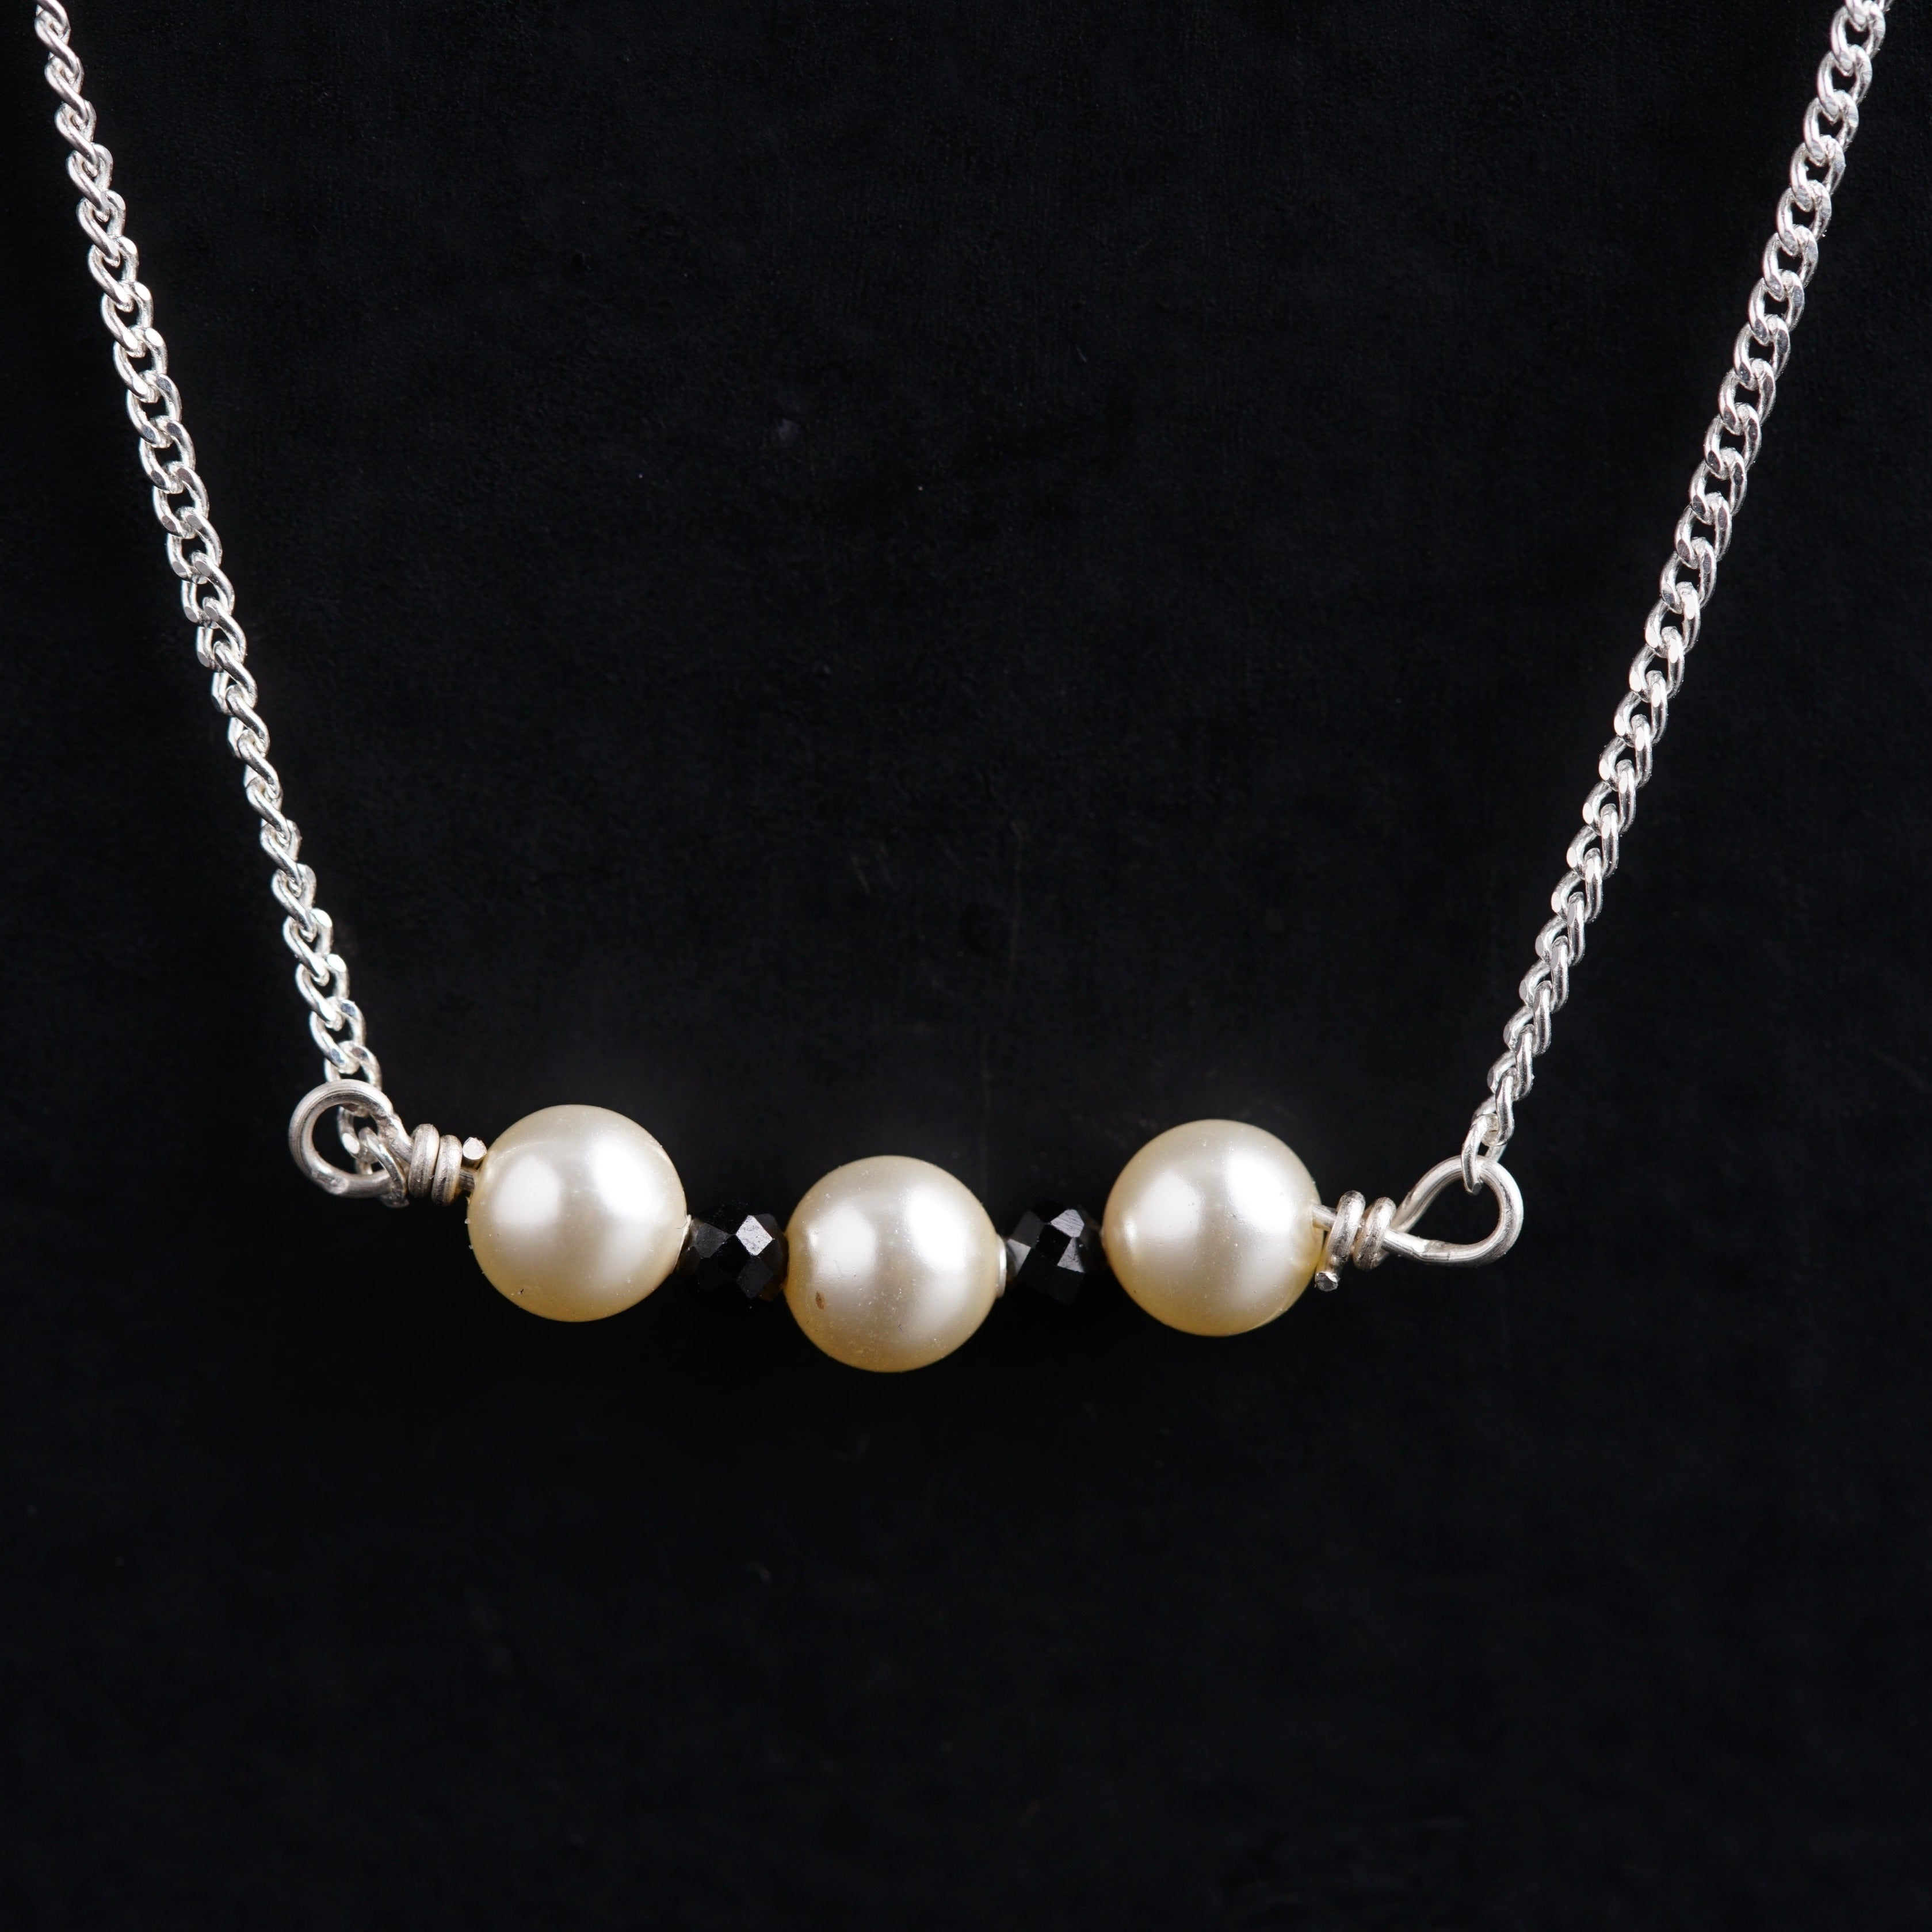 a necklace with two pearls hanging from it